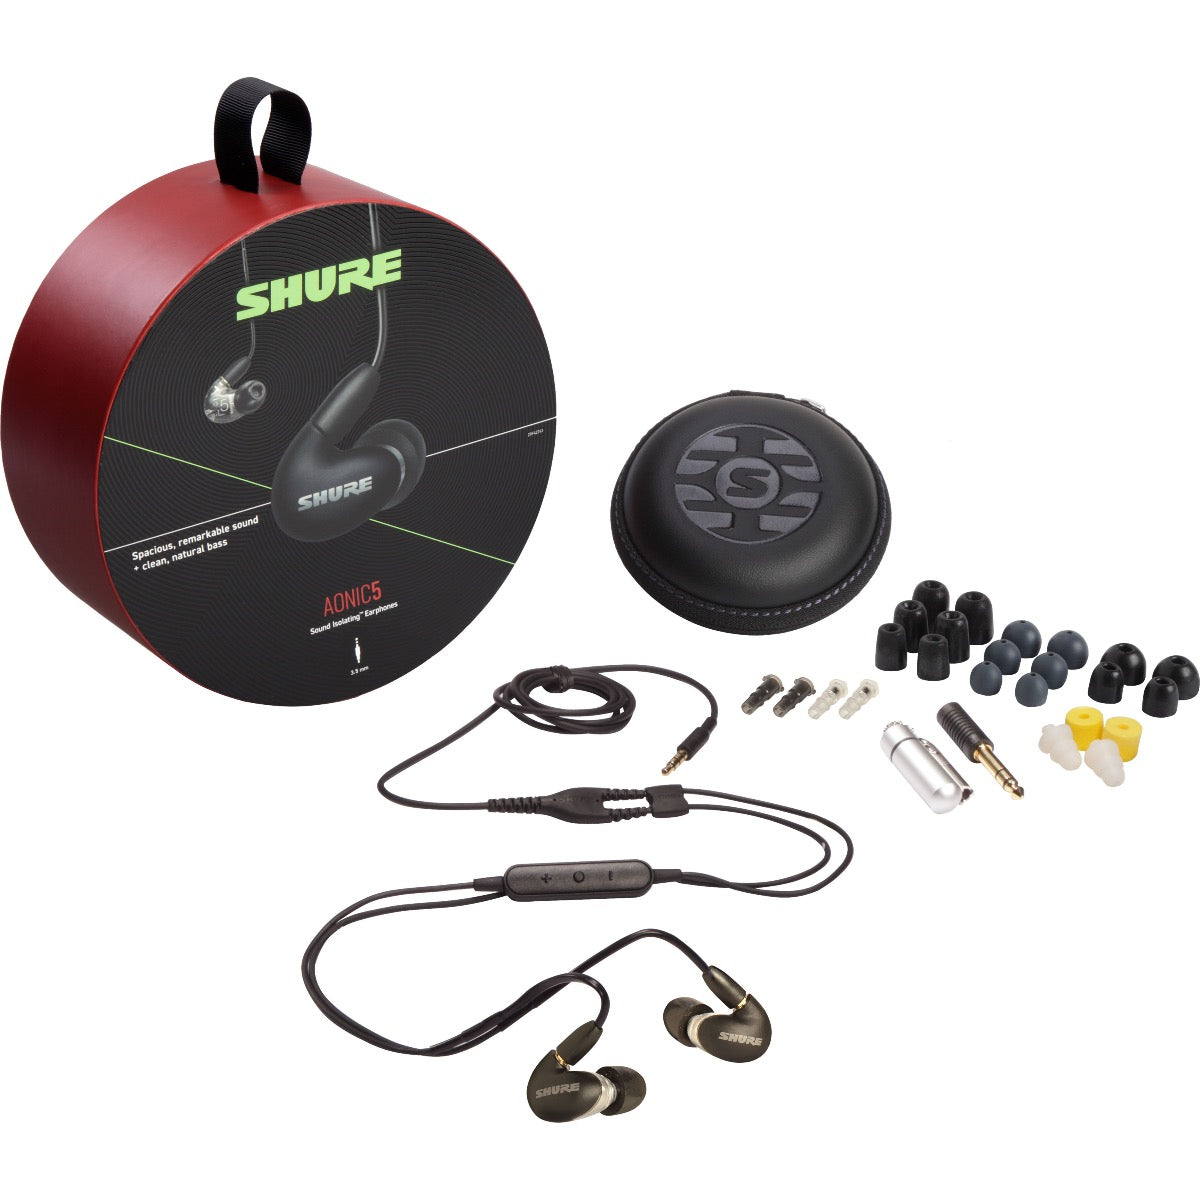 3/4 view of Shure AONIC 5 Sound Isolating Earphones - Black/Clear packaging and components showing front, top and left sides